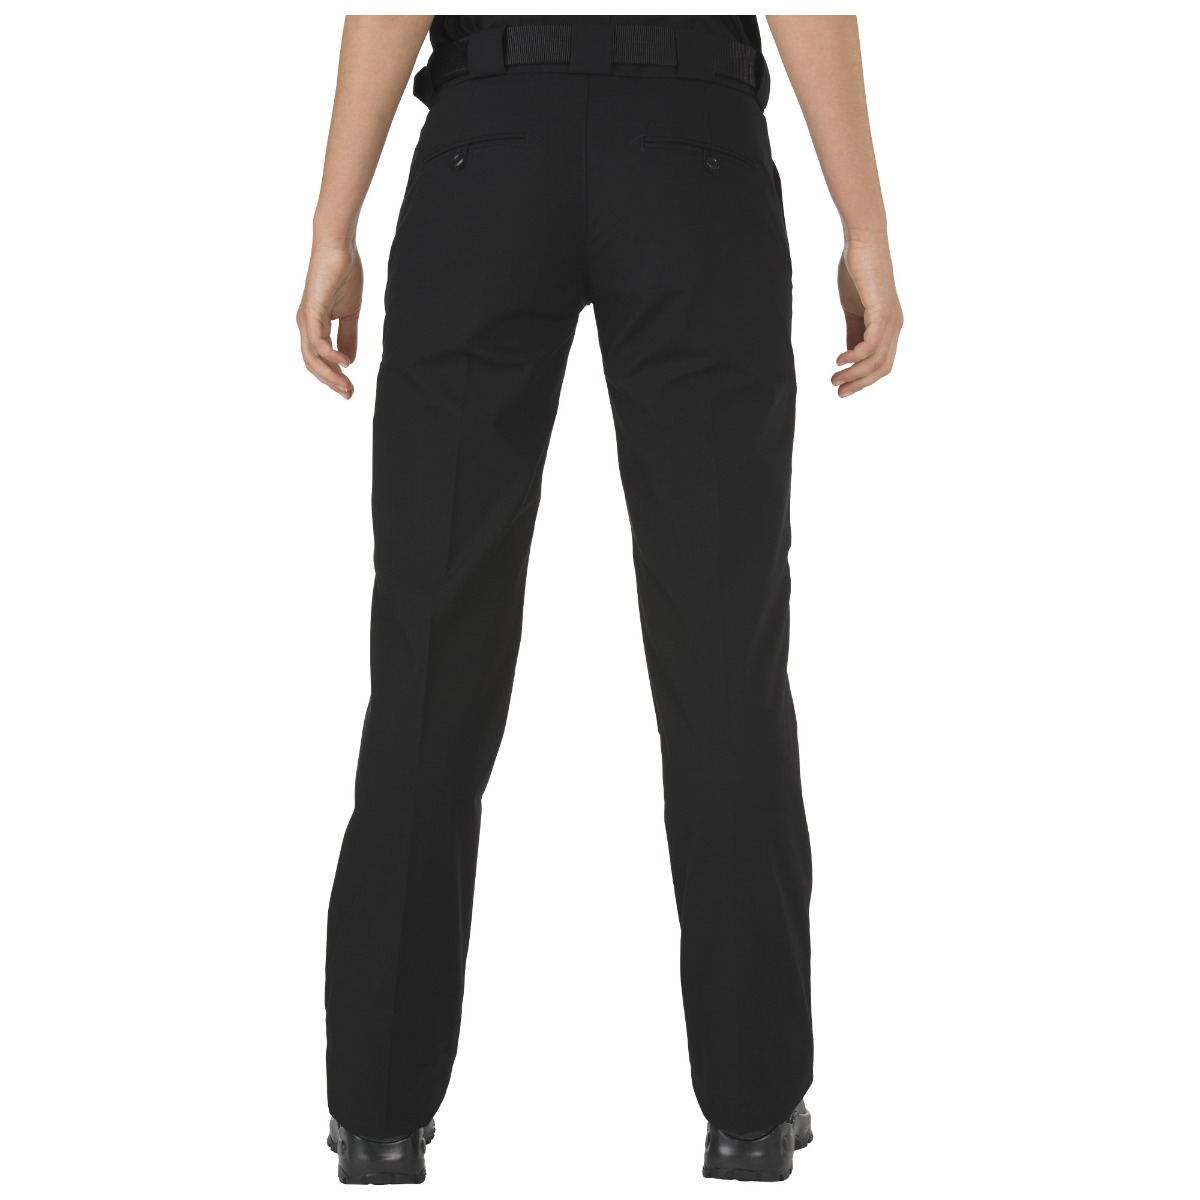 5.11 Strykeâ ¢ Class-A Pdu Pant From 5.11 Tactical-